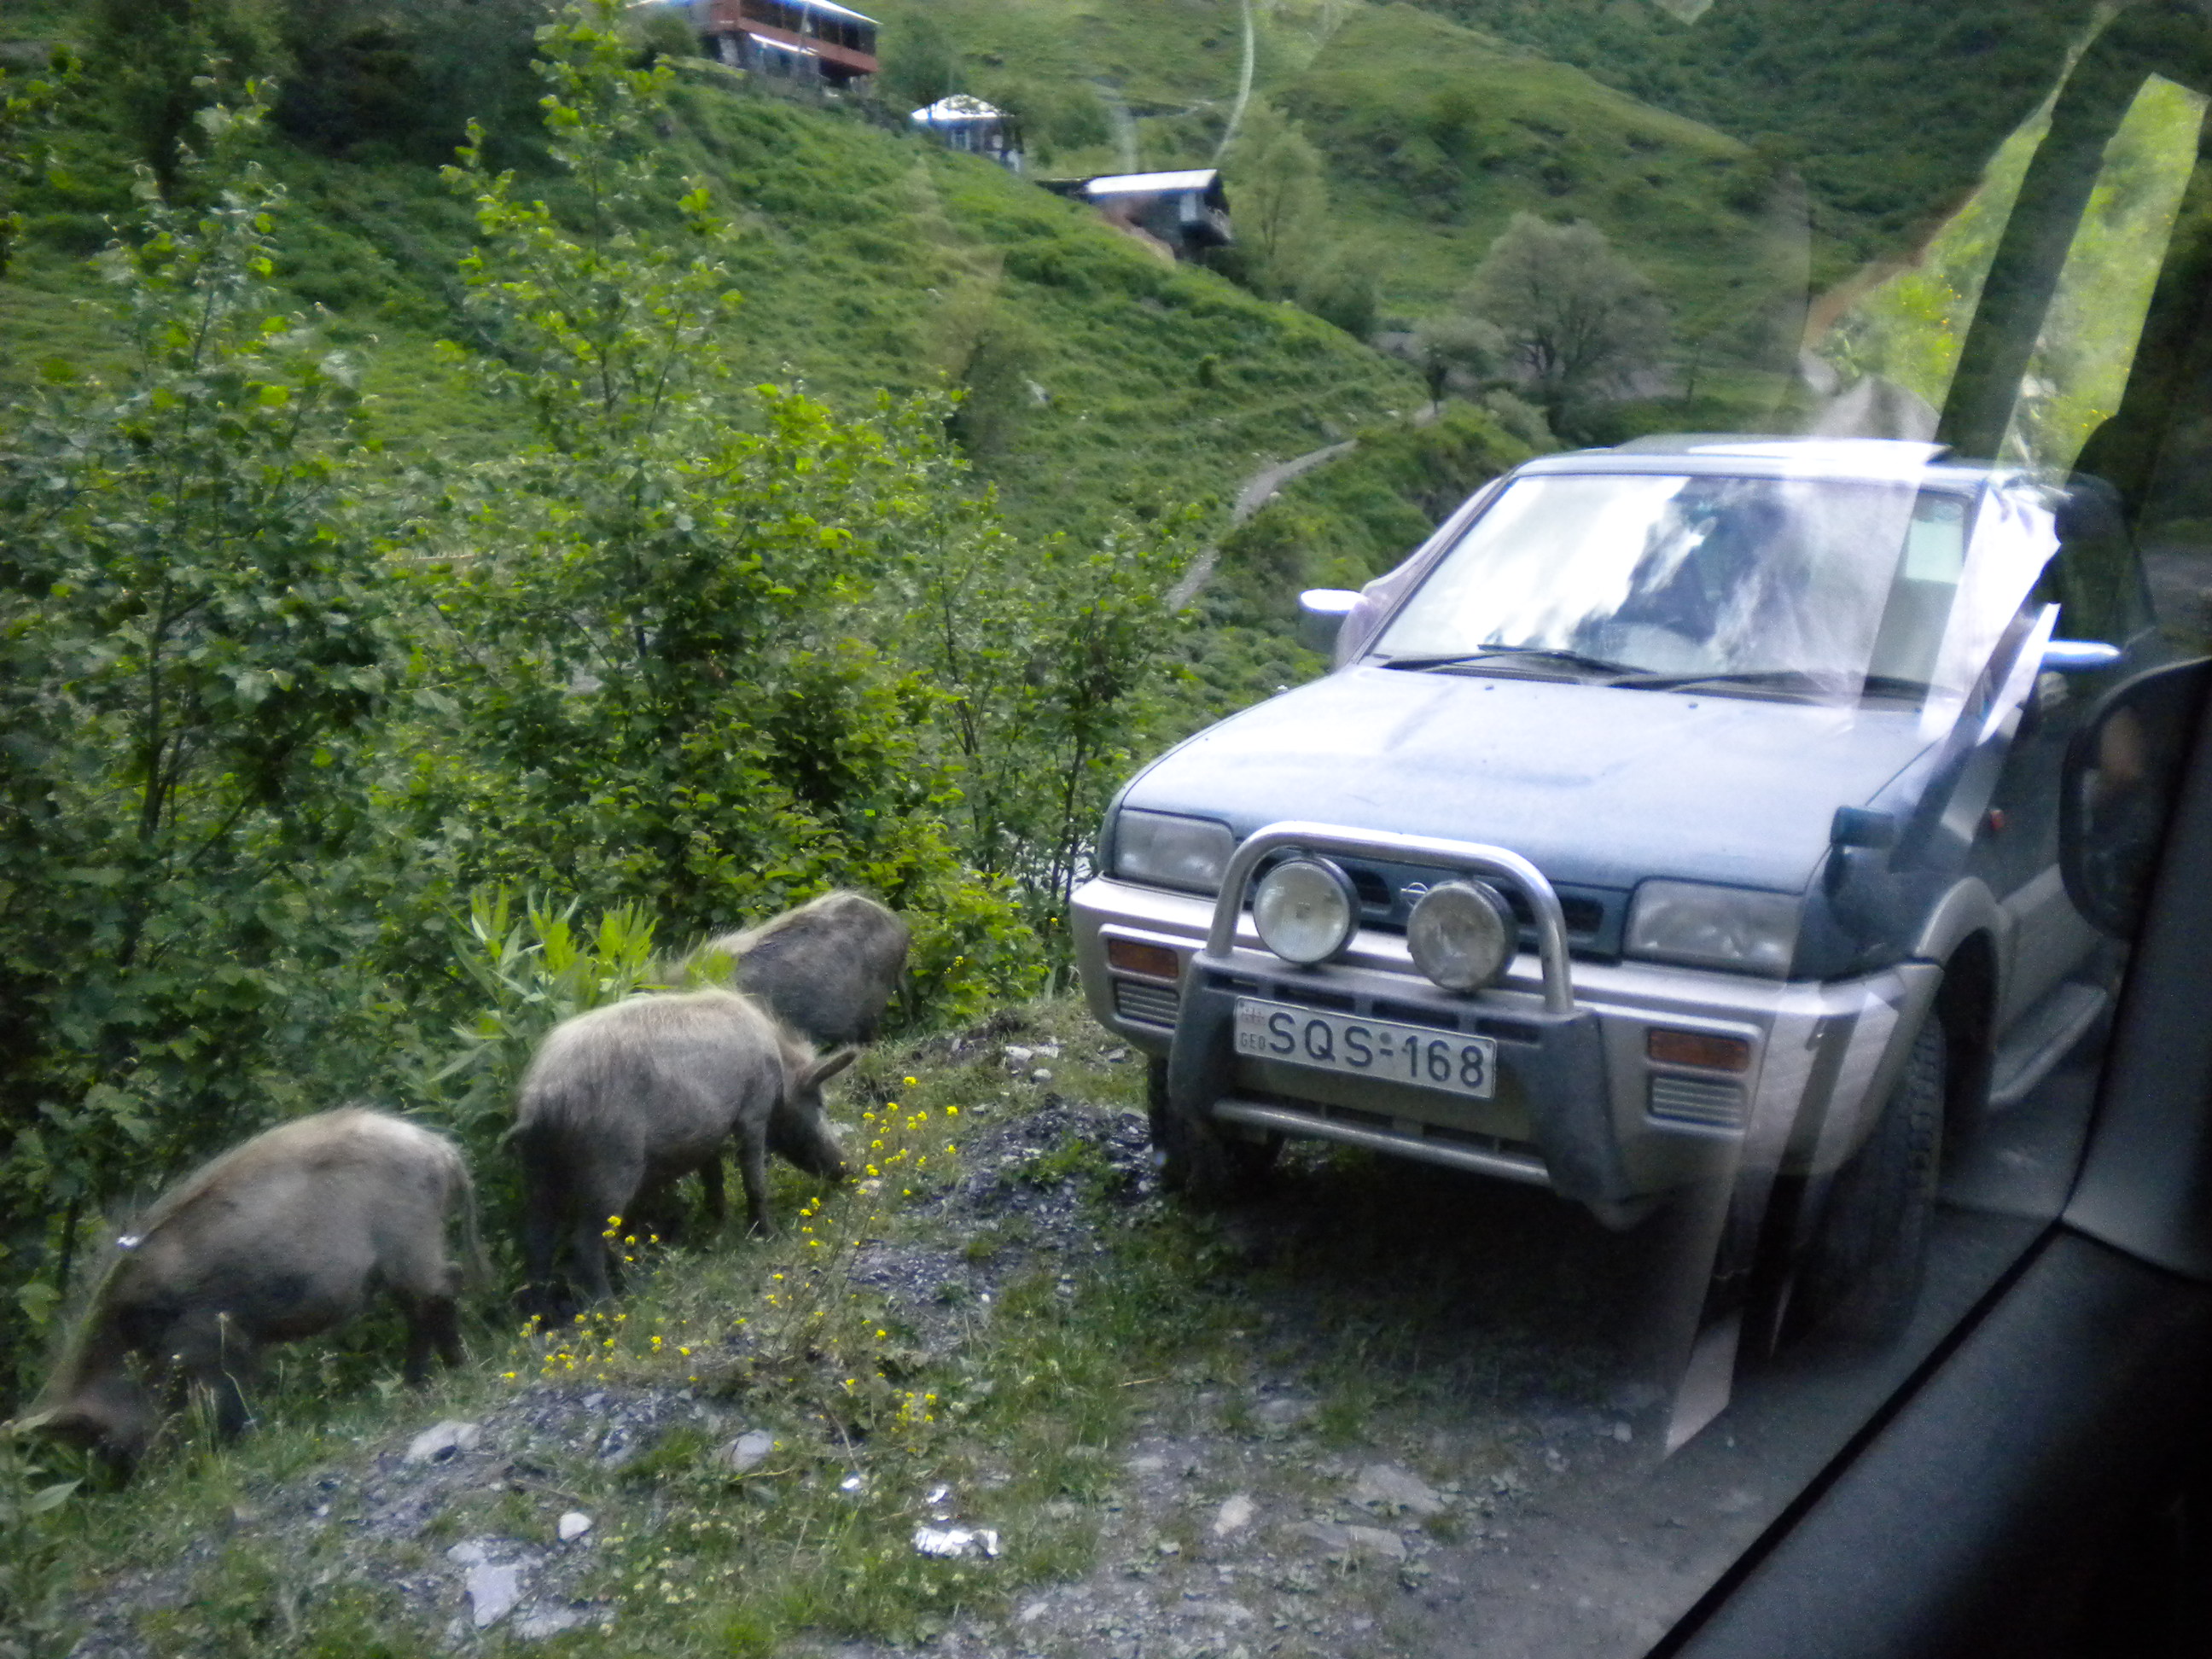 Pig traffic and a right hand drive Japanese Nissan Mistral ...